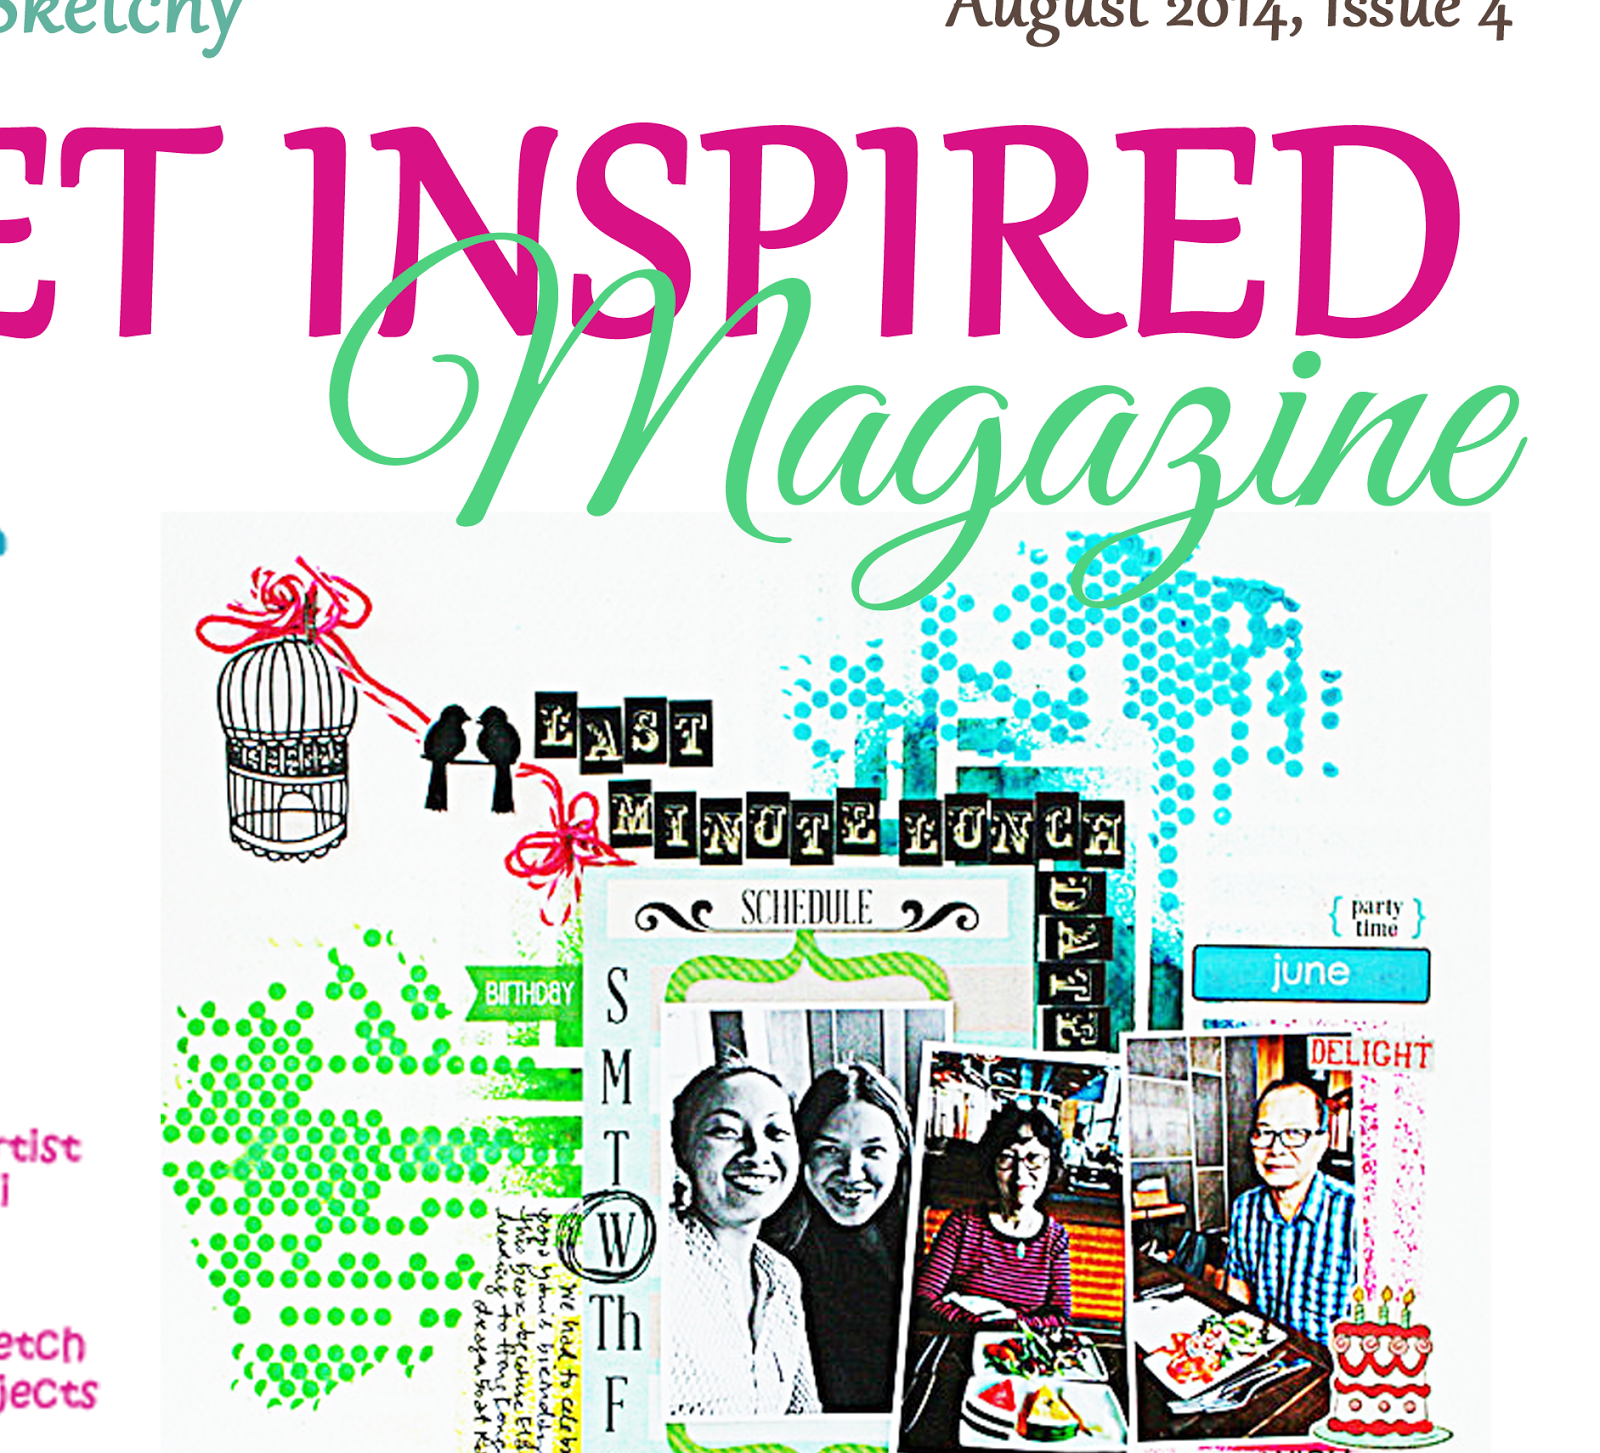 Get inspired Magazine 4th issue